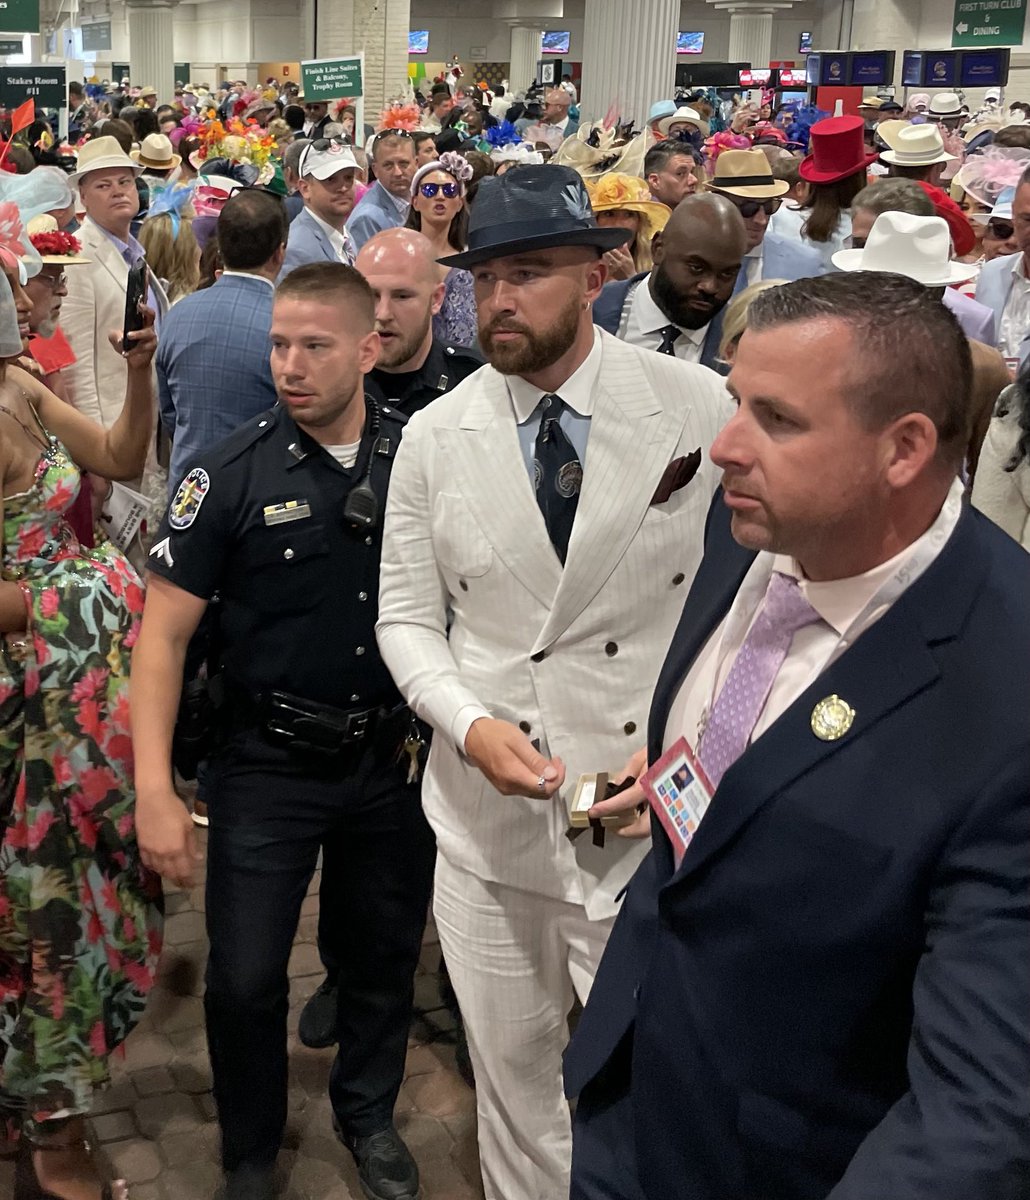 Travis is at the Kentucky Derby!!